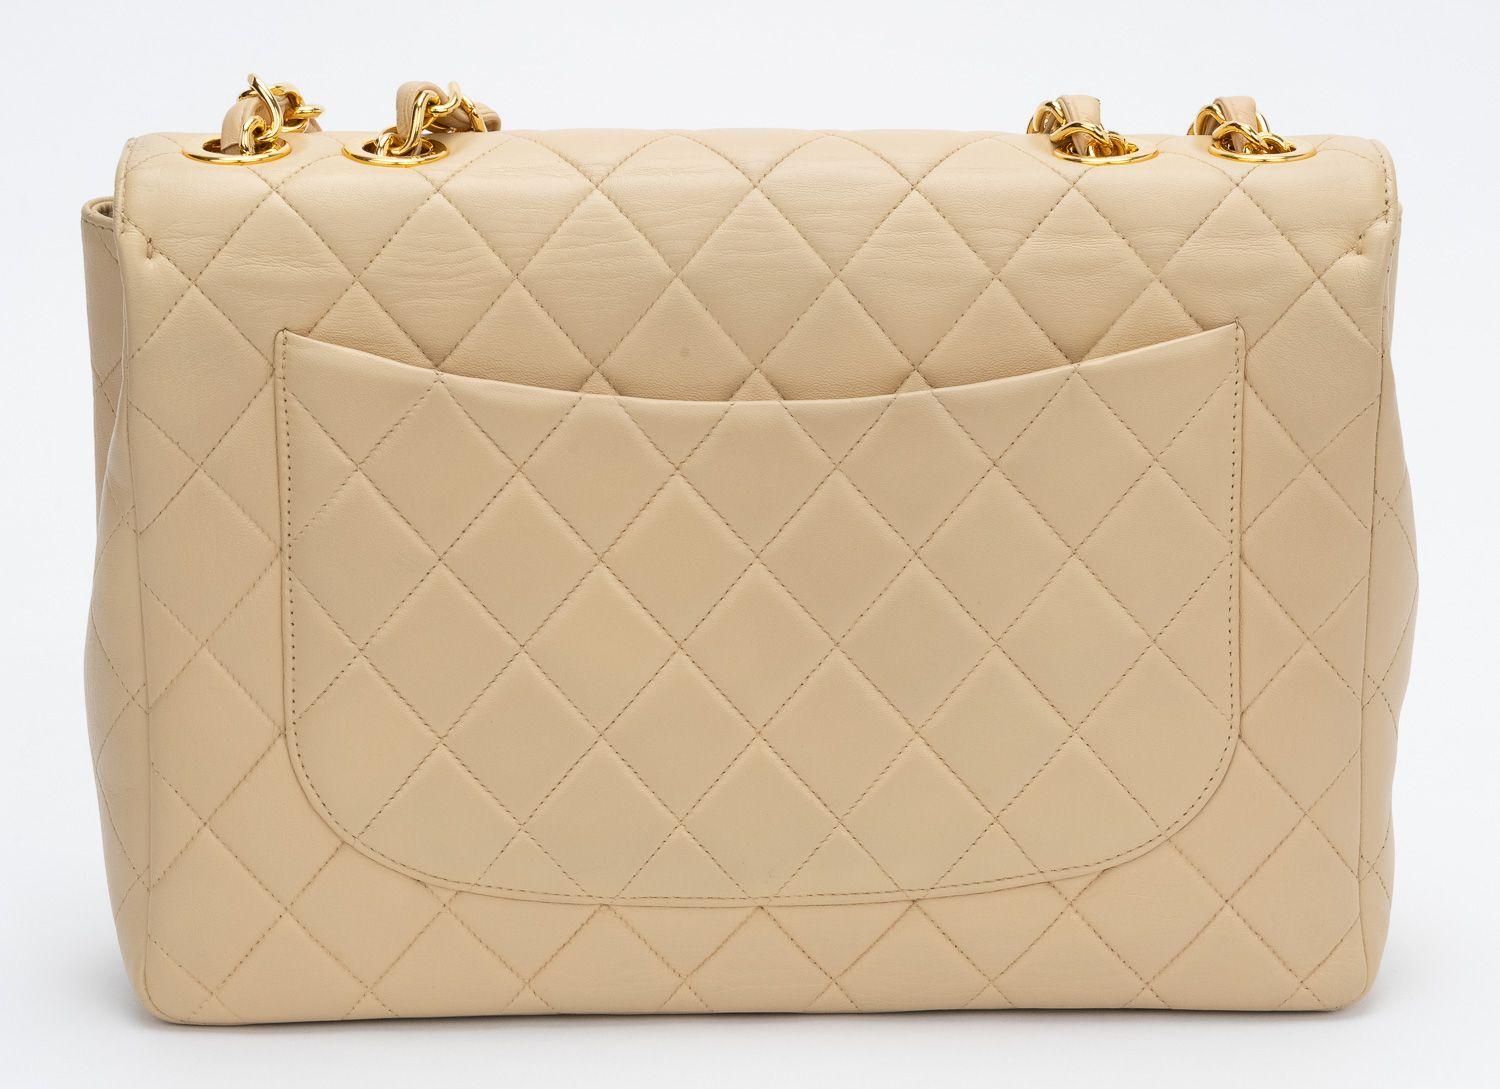 Chanel Beige Jumbo Flap 24kt Gold Hardware In Good Condition For Sale In West Hollywood, CA